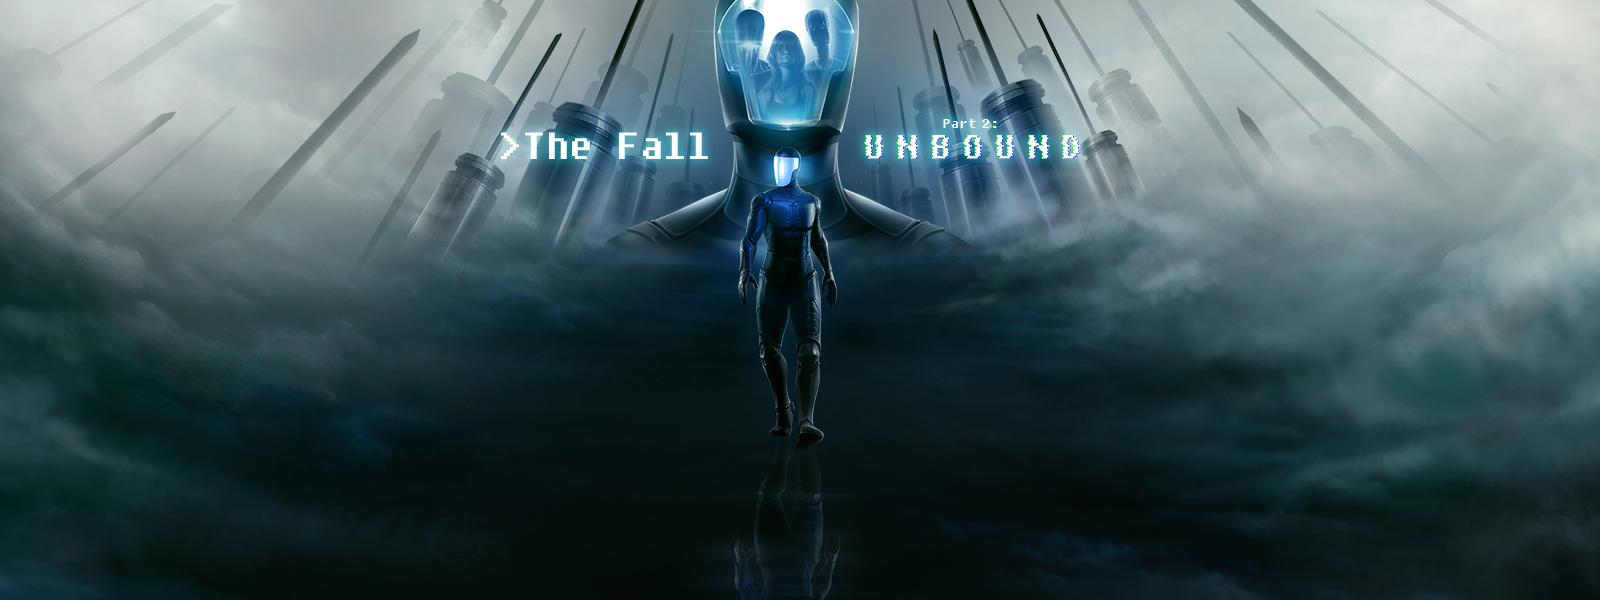 The Fall Part 2: Unbound, постер № 2